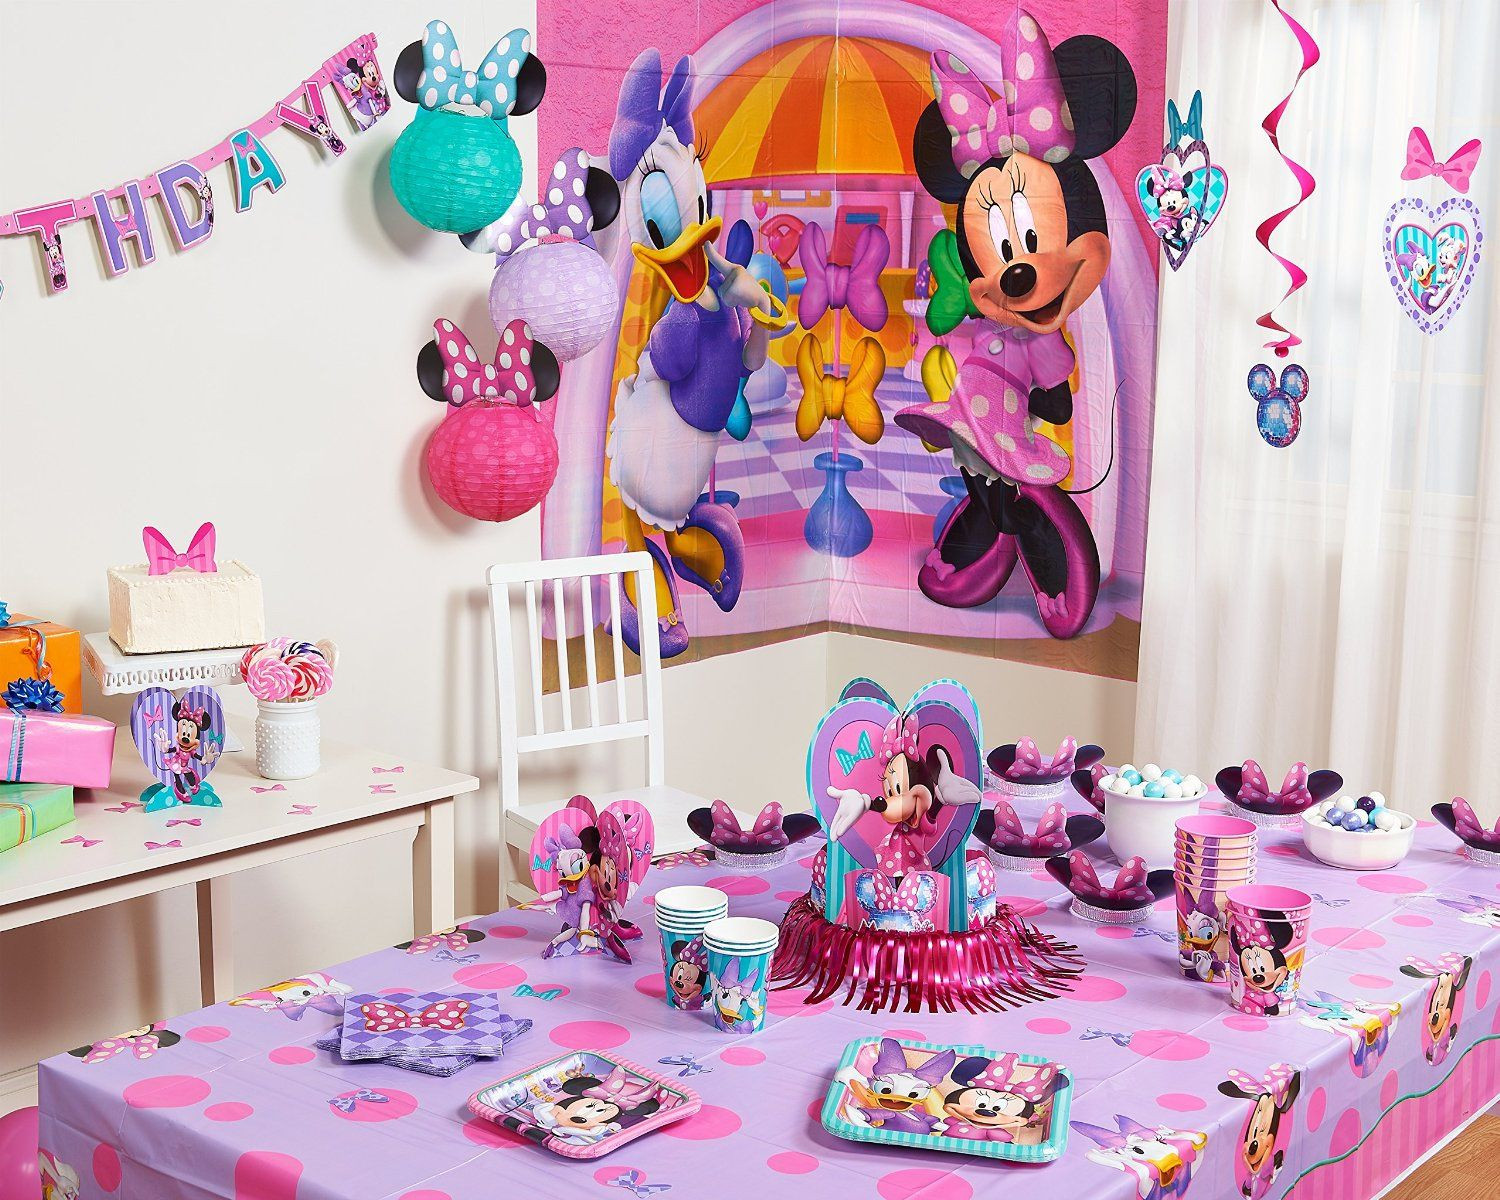 Minnie Bowtique Birthday Party
 AmazonSmile Minnie Mouse Bowtique Plastic Table Cover 54